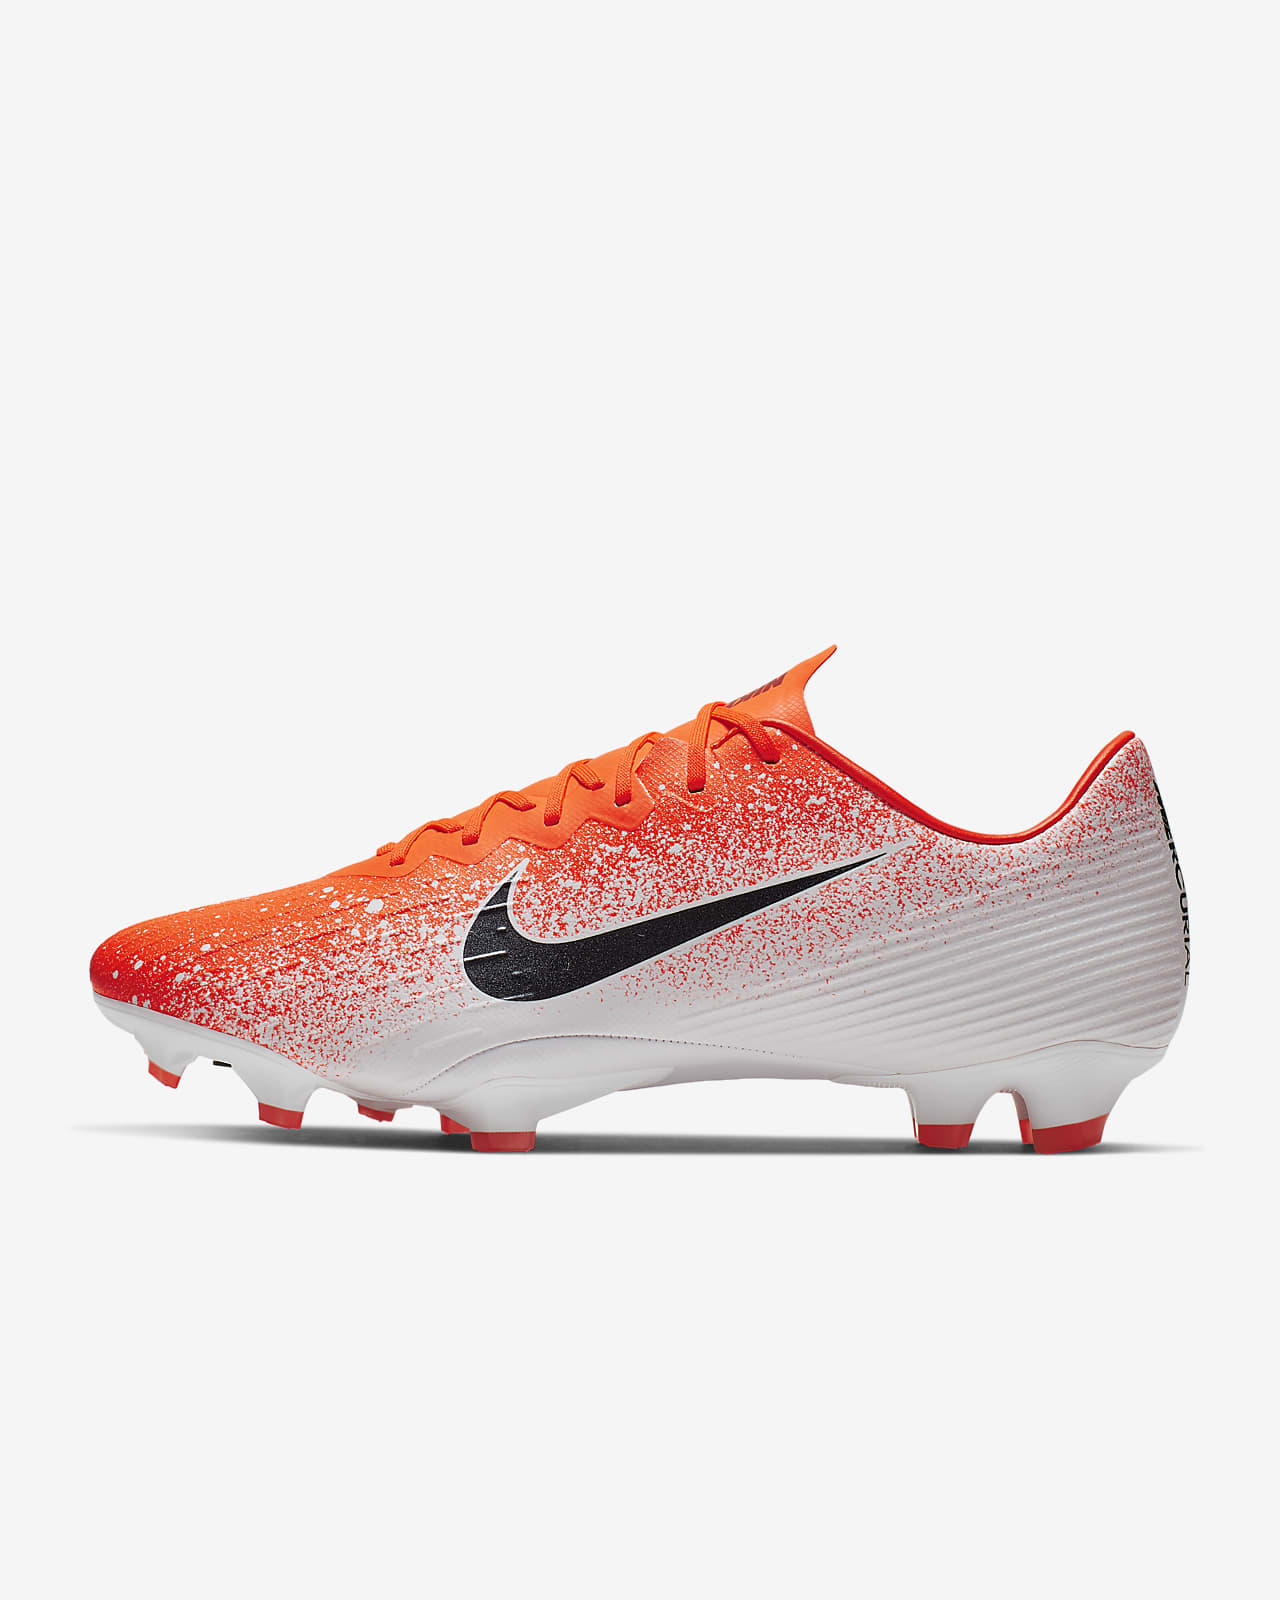 soccer cleats under 40 dollars